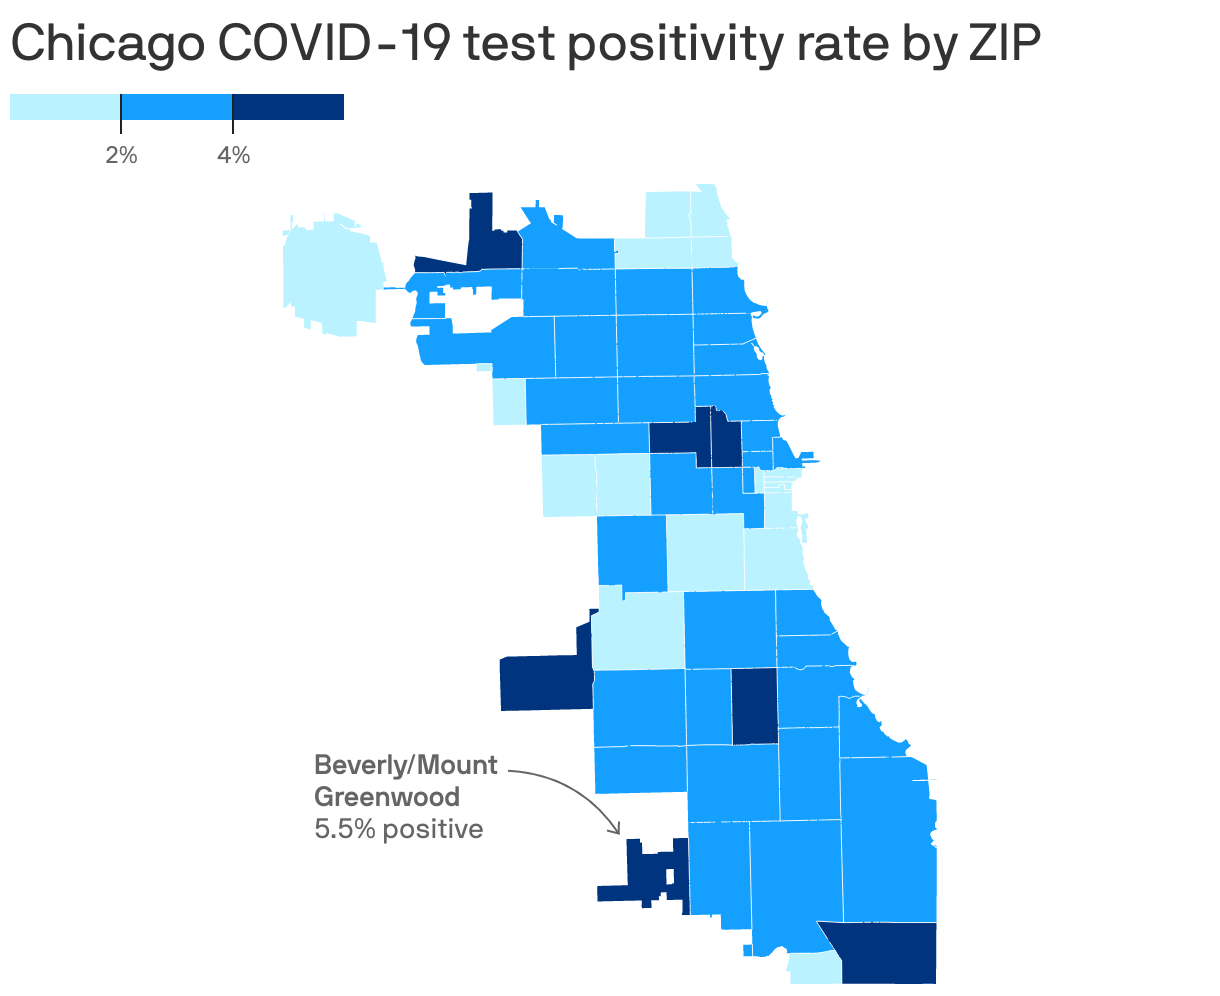 Chicago COVID-19 test positivity rate by ZIP